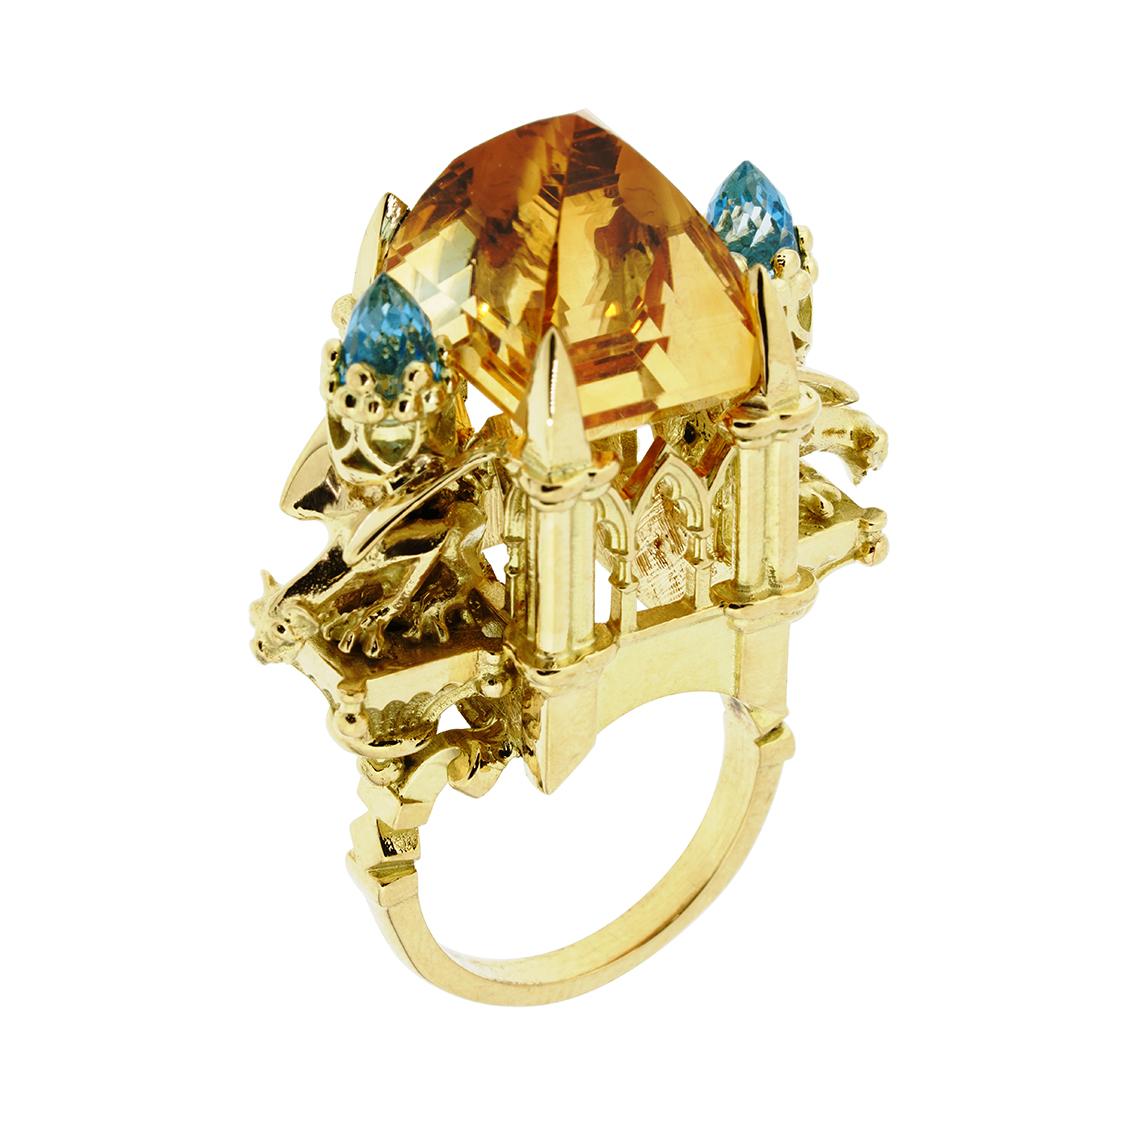 This majestic ring is a truly wondrous one of a kind piece.

Handcrafted in 18kt yellow gold this glorious ring features a central 16mm x 12.6mm radiant citrine of 20.98 carats, resplendent atop a signature William Llewellyn Griffiths cathedral